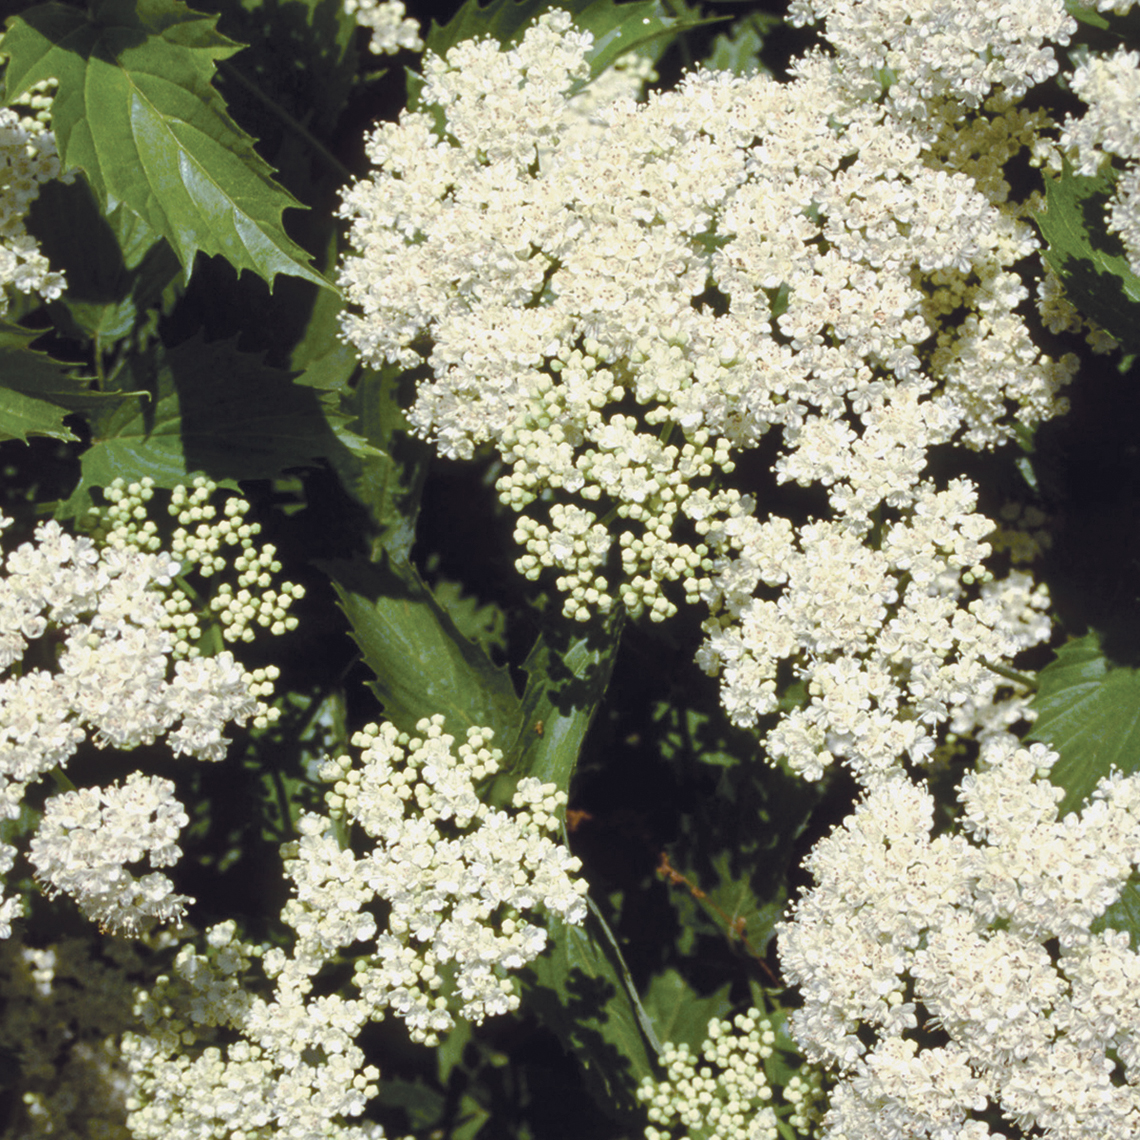 The white flowers of Blue Muffin viburnum